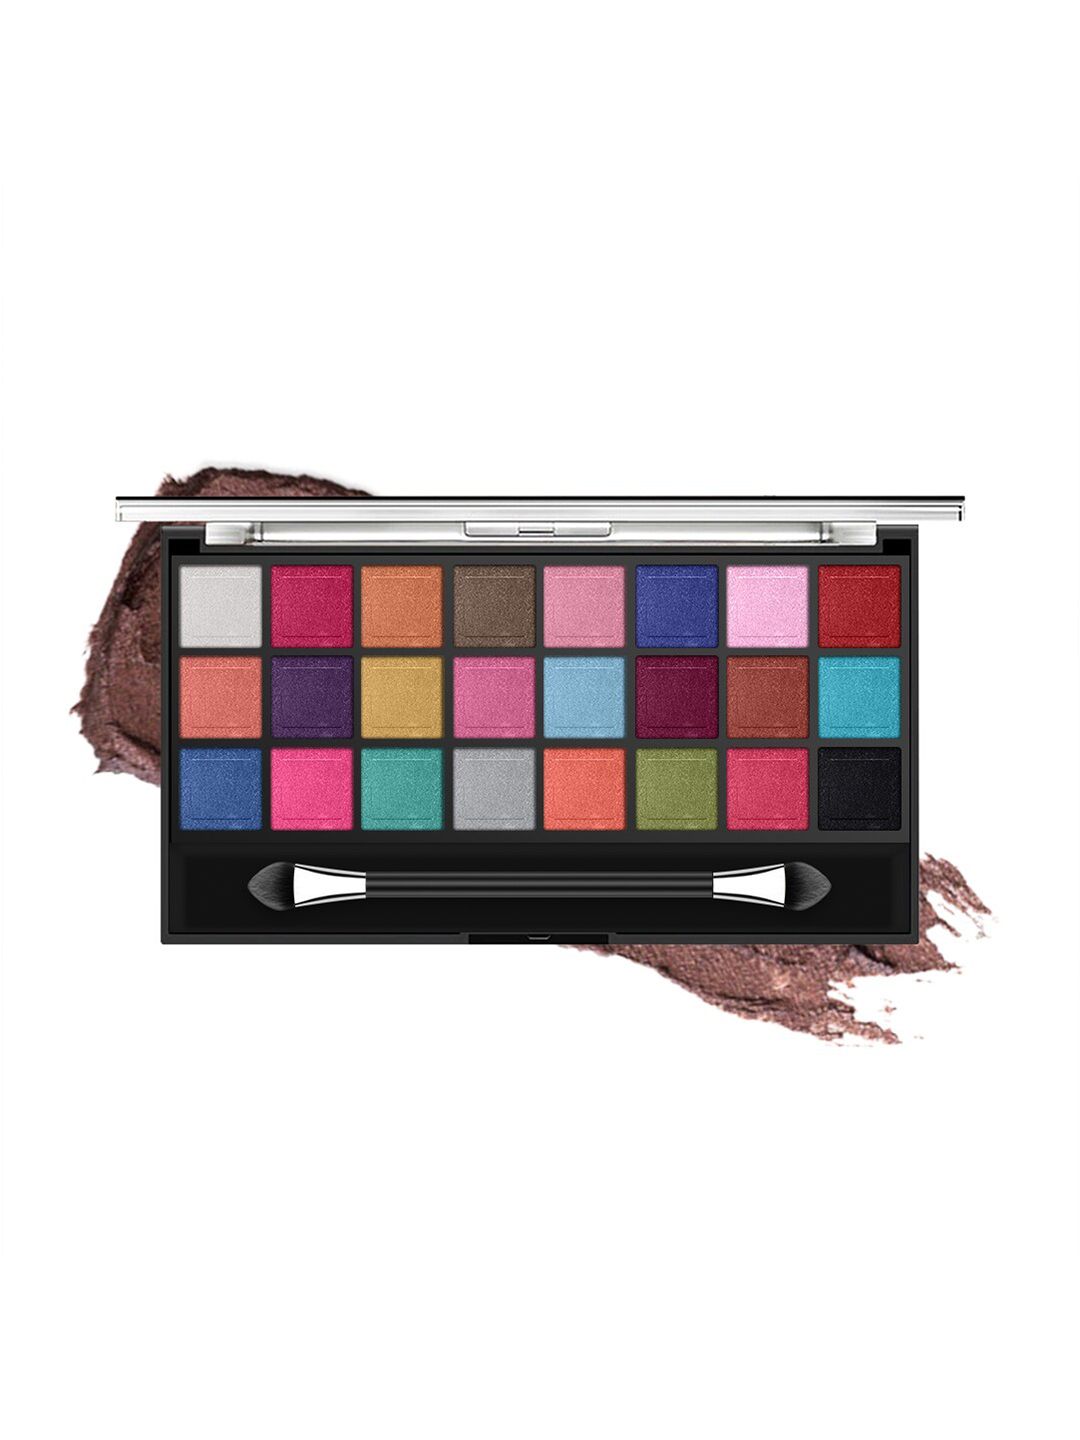 MISS ROSE 24 Color Matte Eyeshadow Palette 7001-071 MT01 Price in India